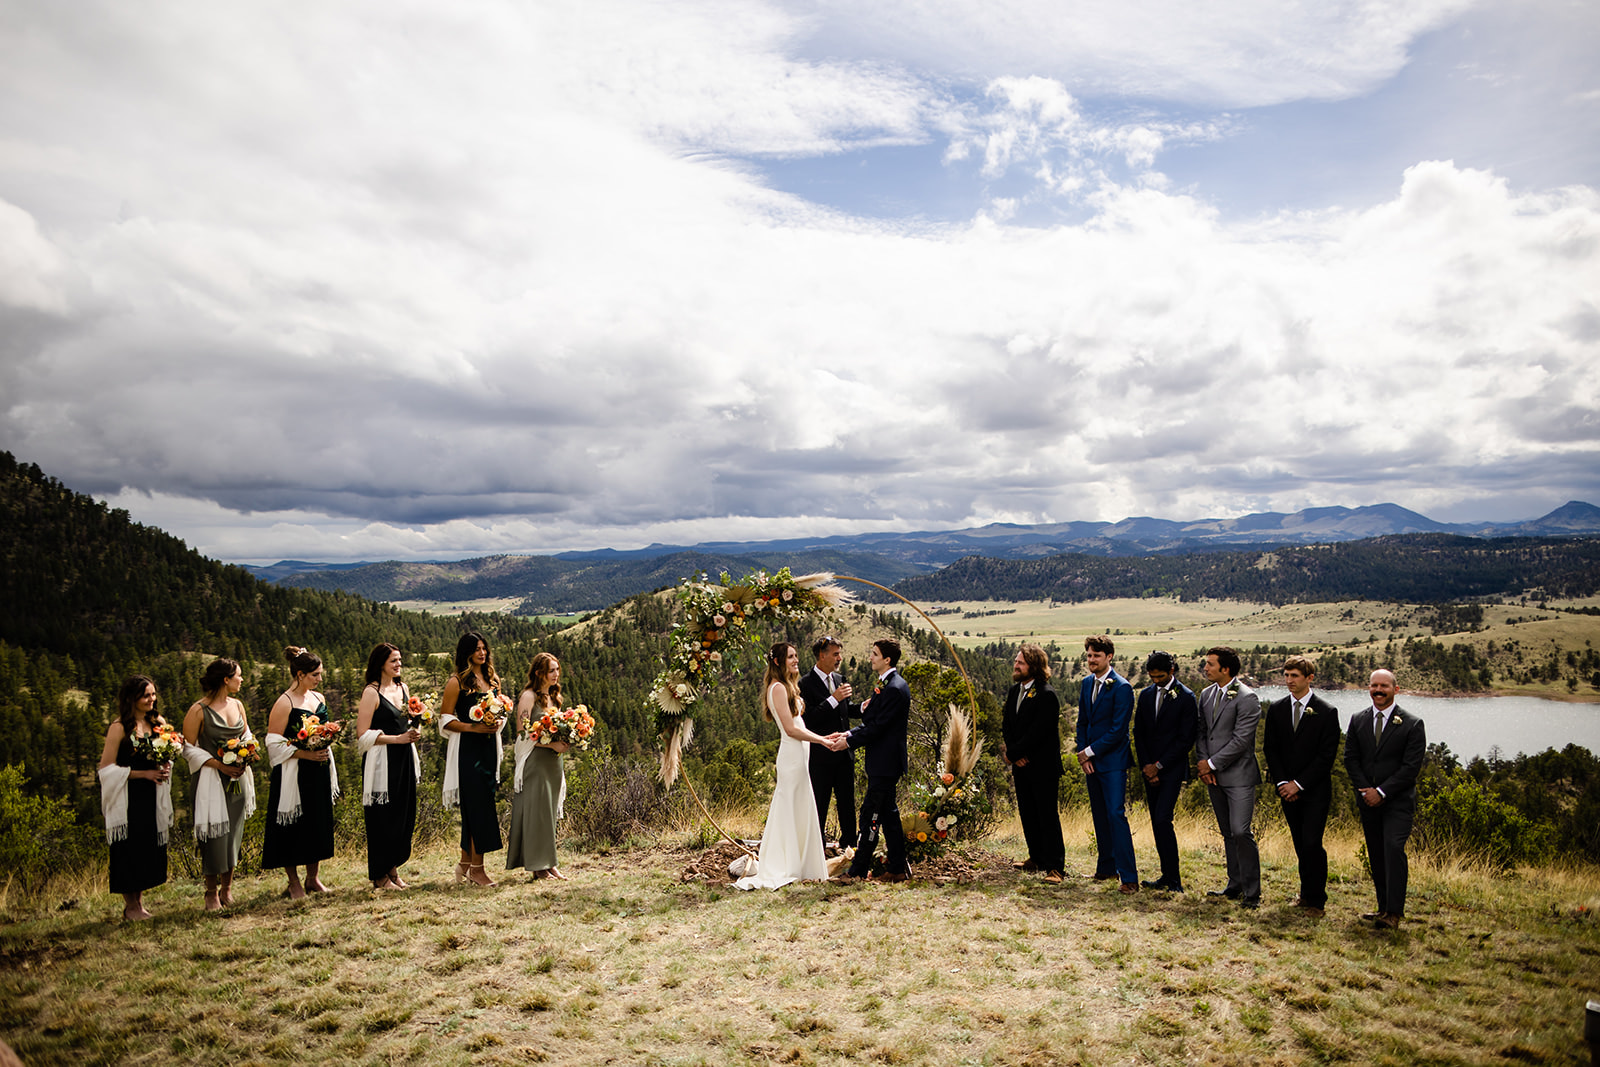 A couple with have their wedding ceremony in Florissant Colorado with mountains in the background.